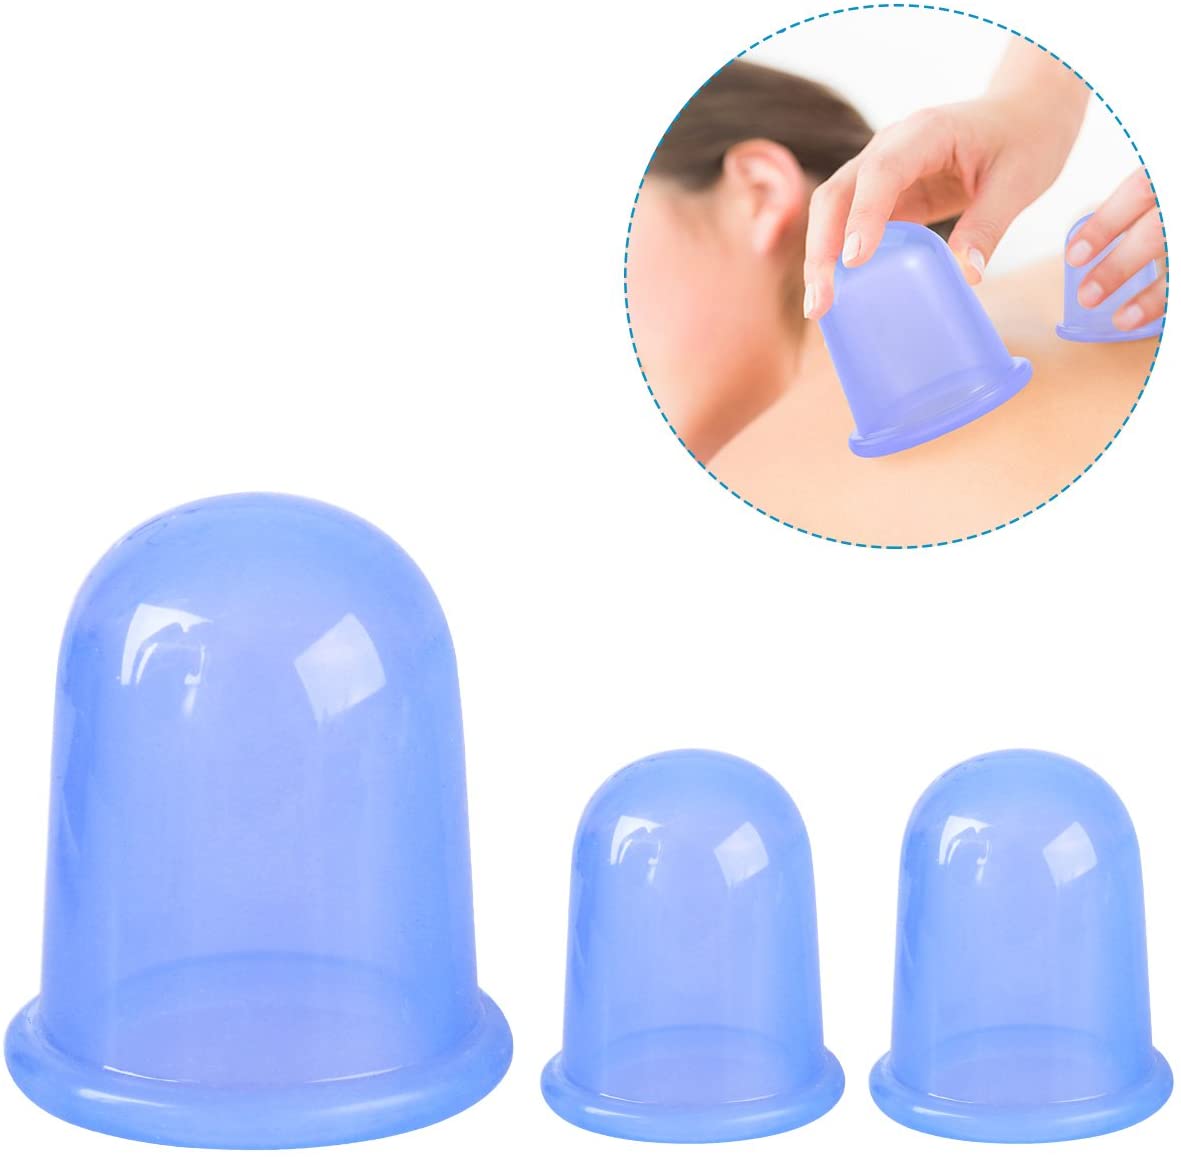 Professional Medical Grade Suction Cups Silicone Suction Cups For Therapy